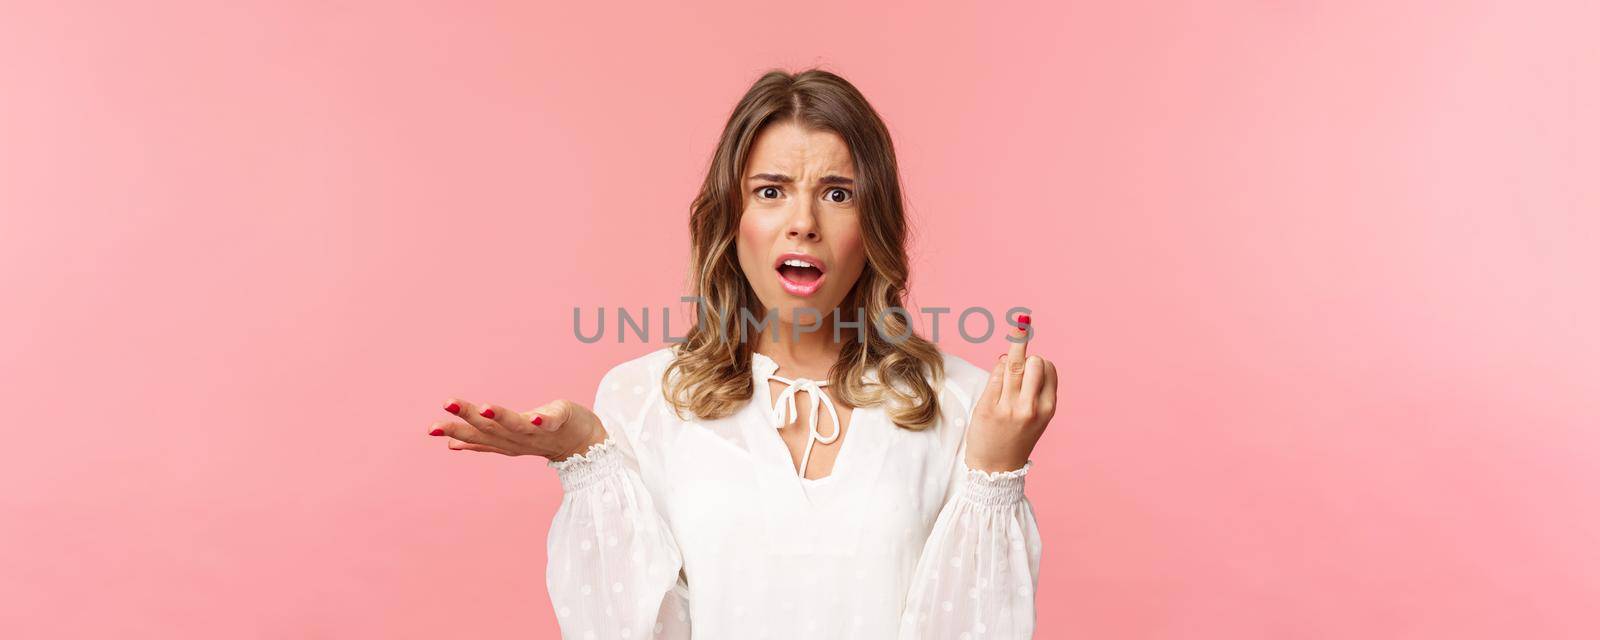 Close-up portrait of questioned and annoyed young woman tired of waiting for boyfriend making next step and do proposal, showing finger without ring, shrugging and complaining.